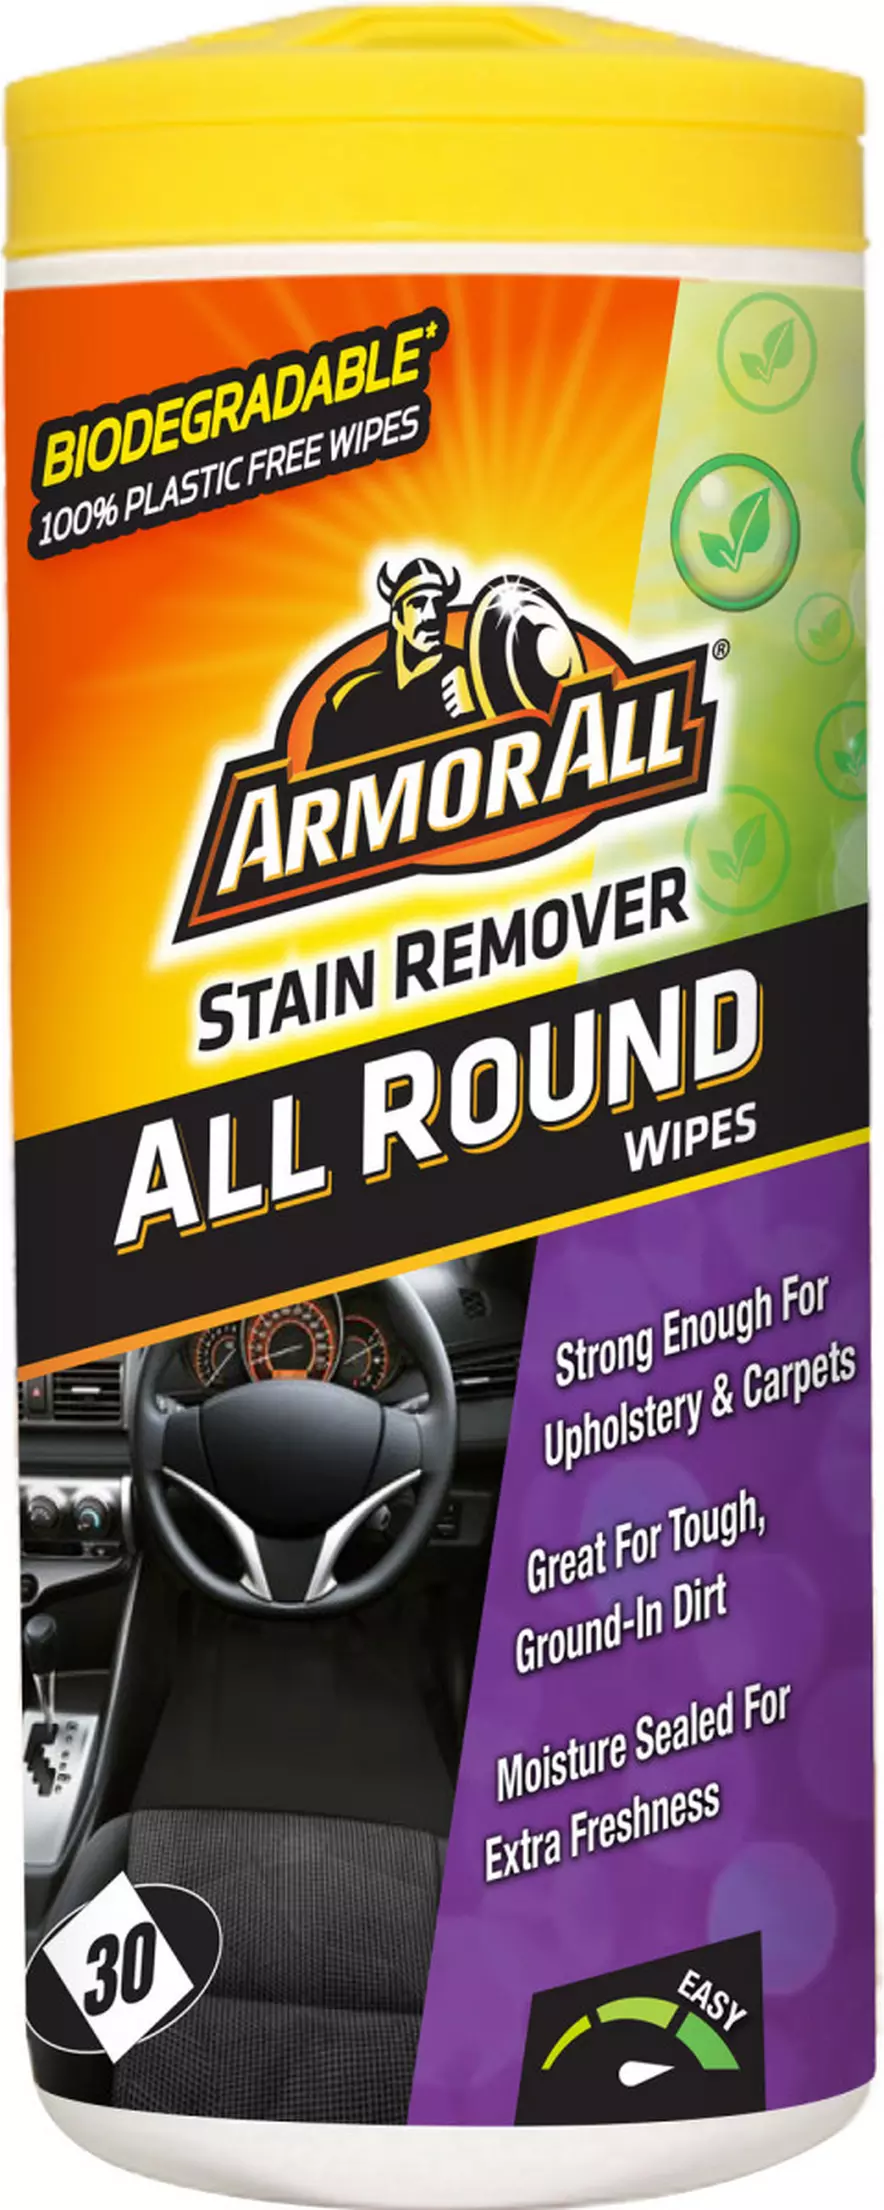 Armorall Carpet & Upholstery Cleaning Wipes for Fabric, Carpet & Floor Mats, 12 Wipes